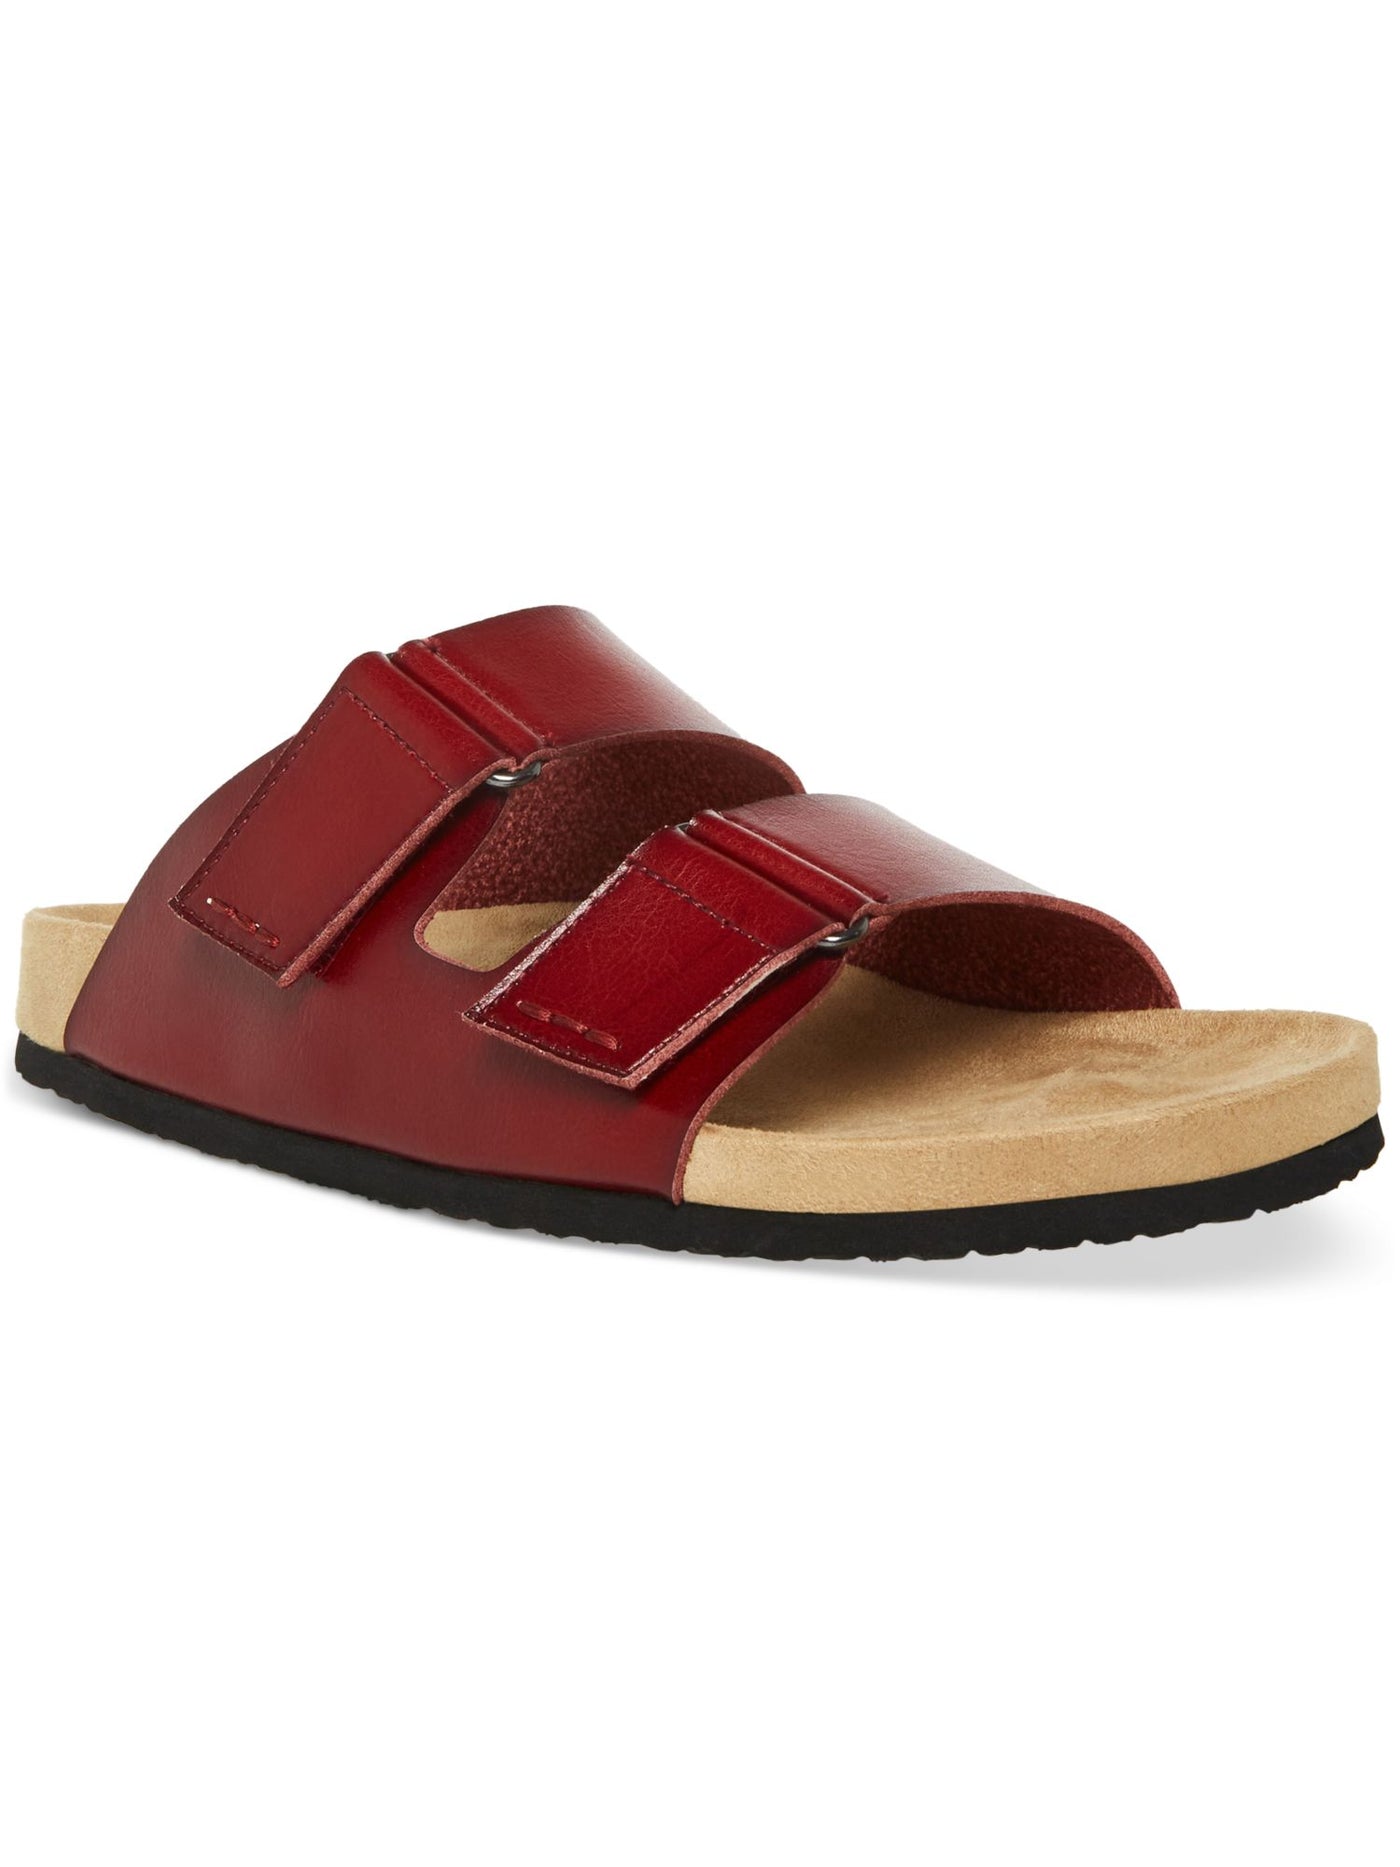 MADDEN Mens Maroon Double Straps Contoured Footbed Padded Tisson Round Toe Sandals Shoes 10 M